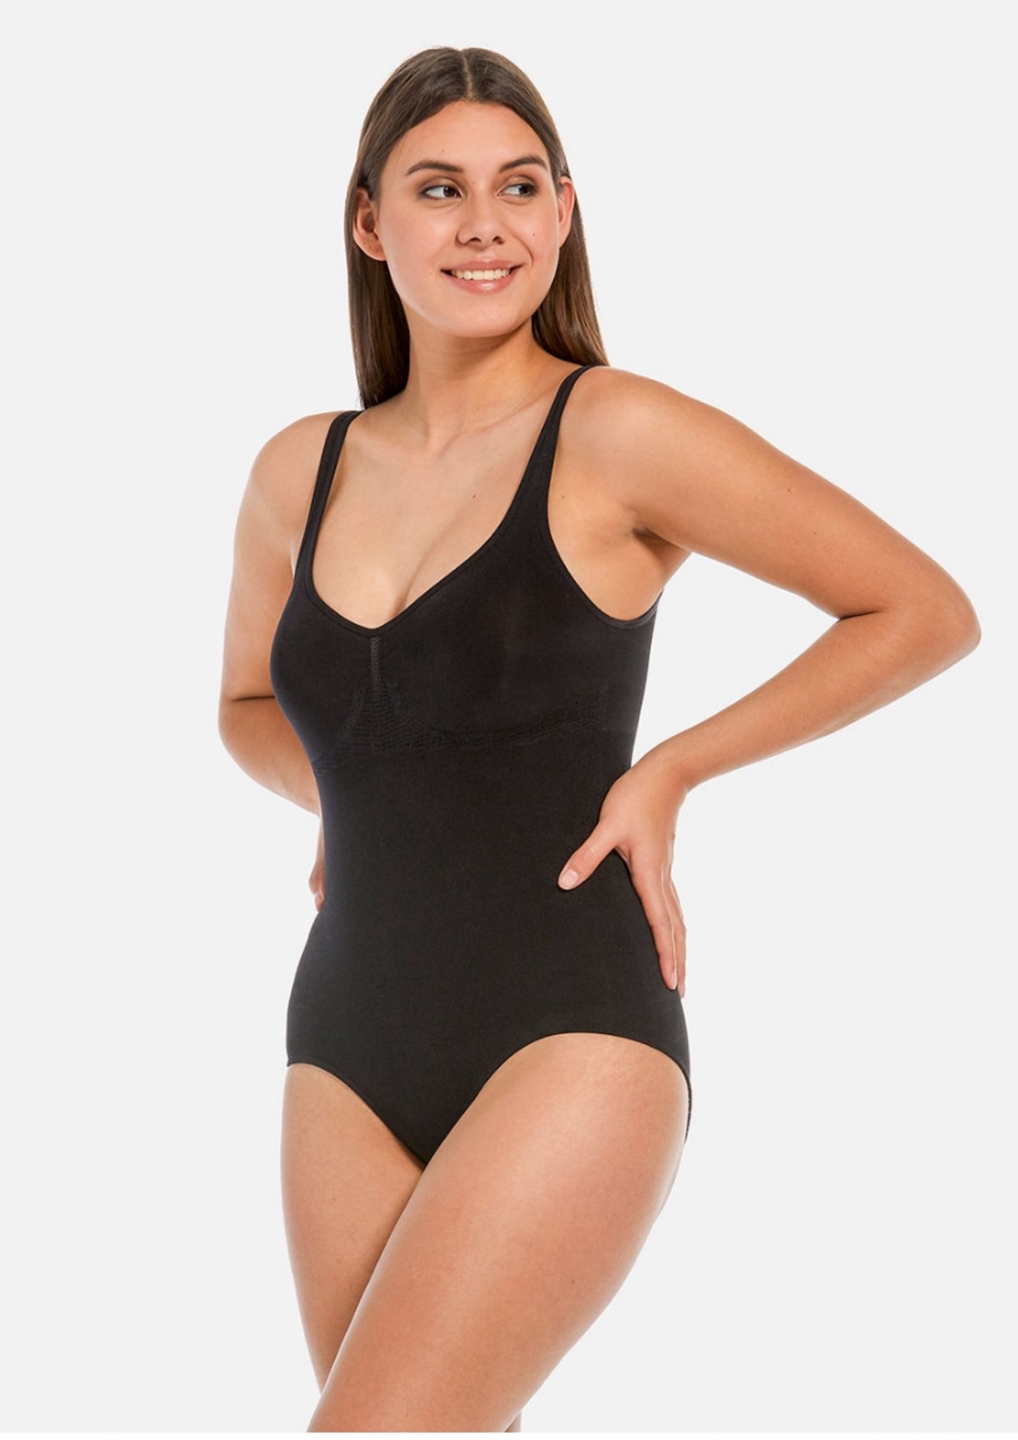 Answering your questions about Shapewear